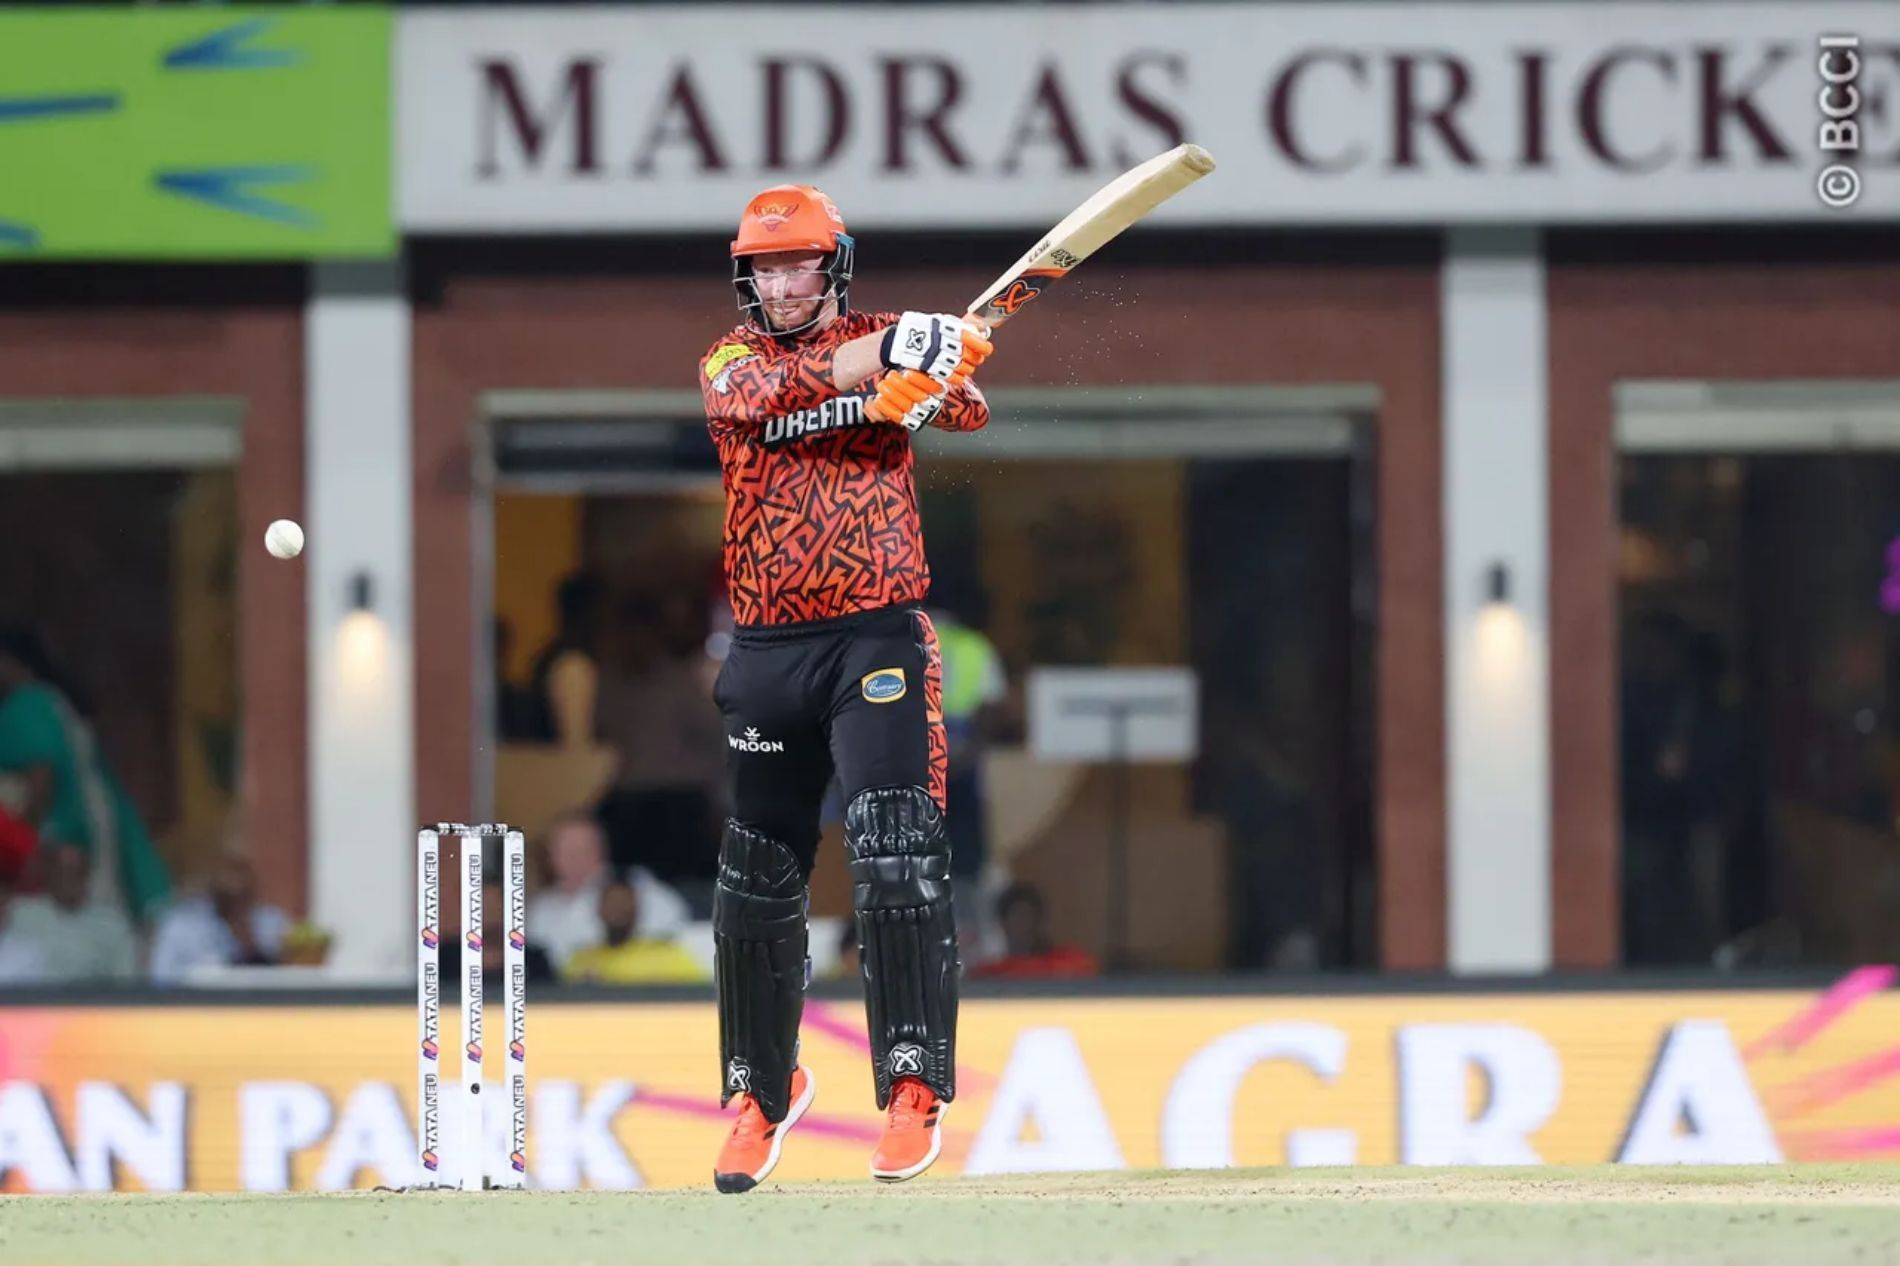 Heinrich Klaasen could be the key for Sunrisers Hyderabad in the middle overs. (Image Credit: BCCI/ iplt20.com)